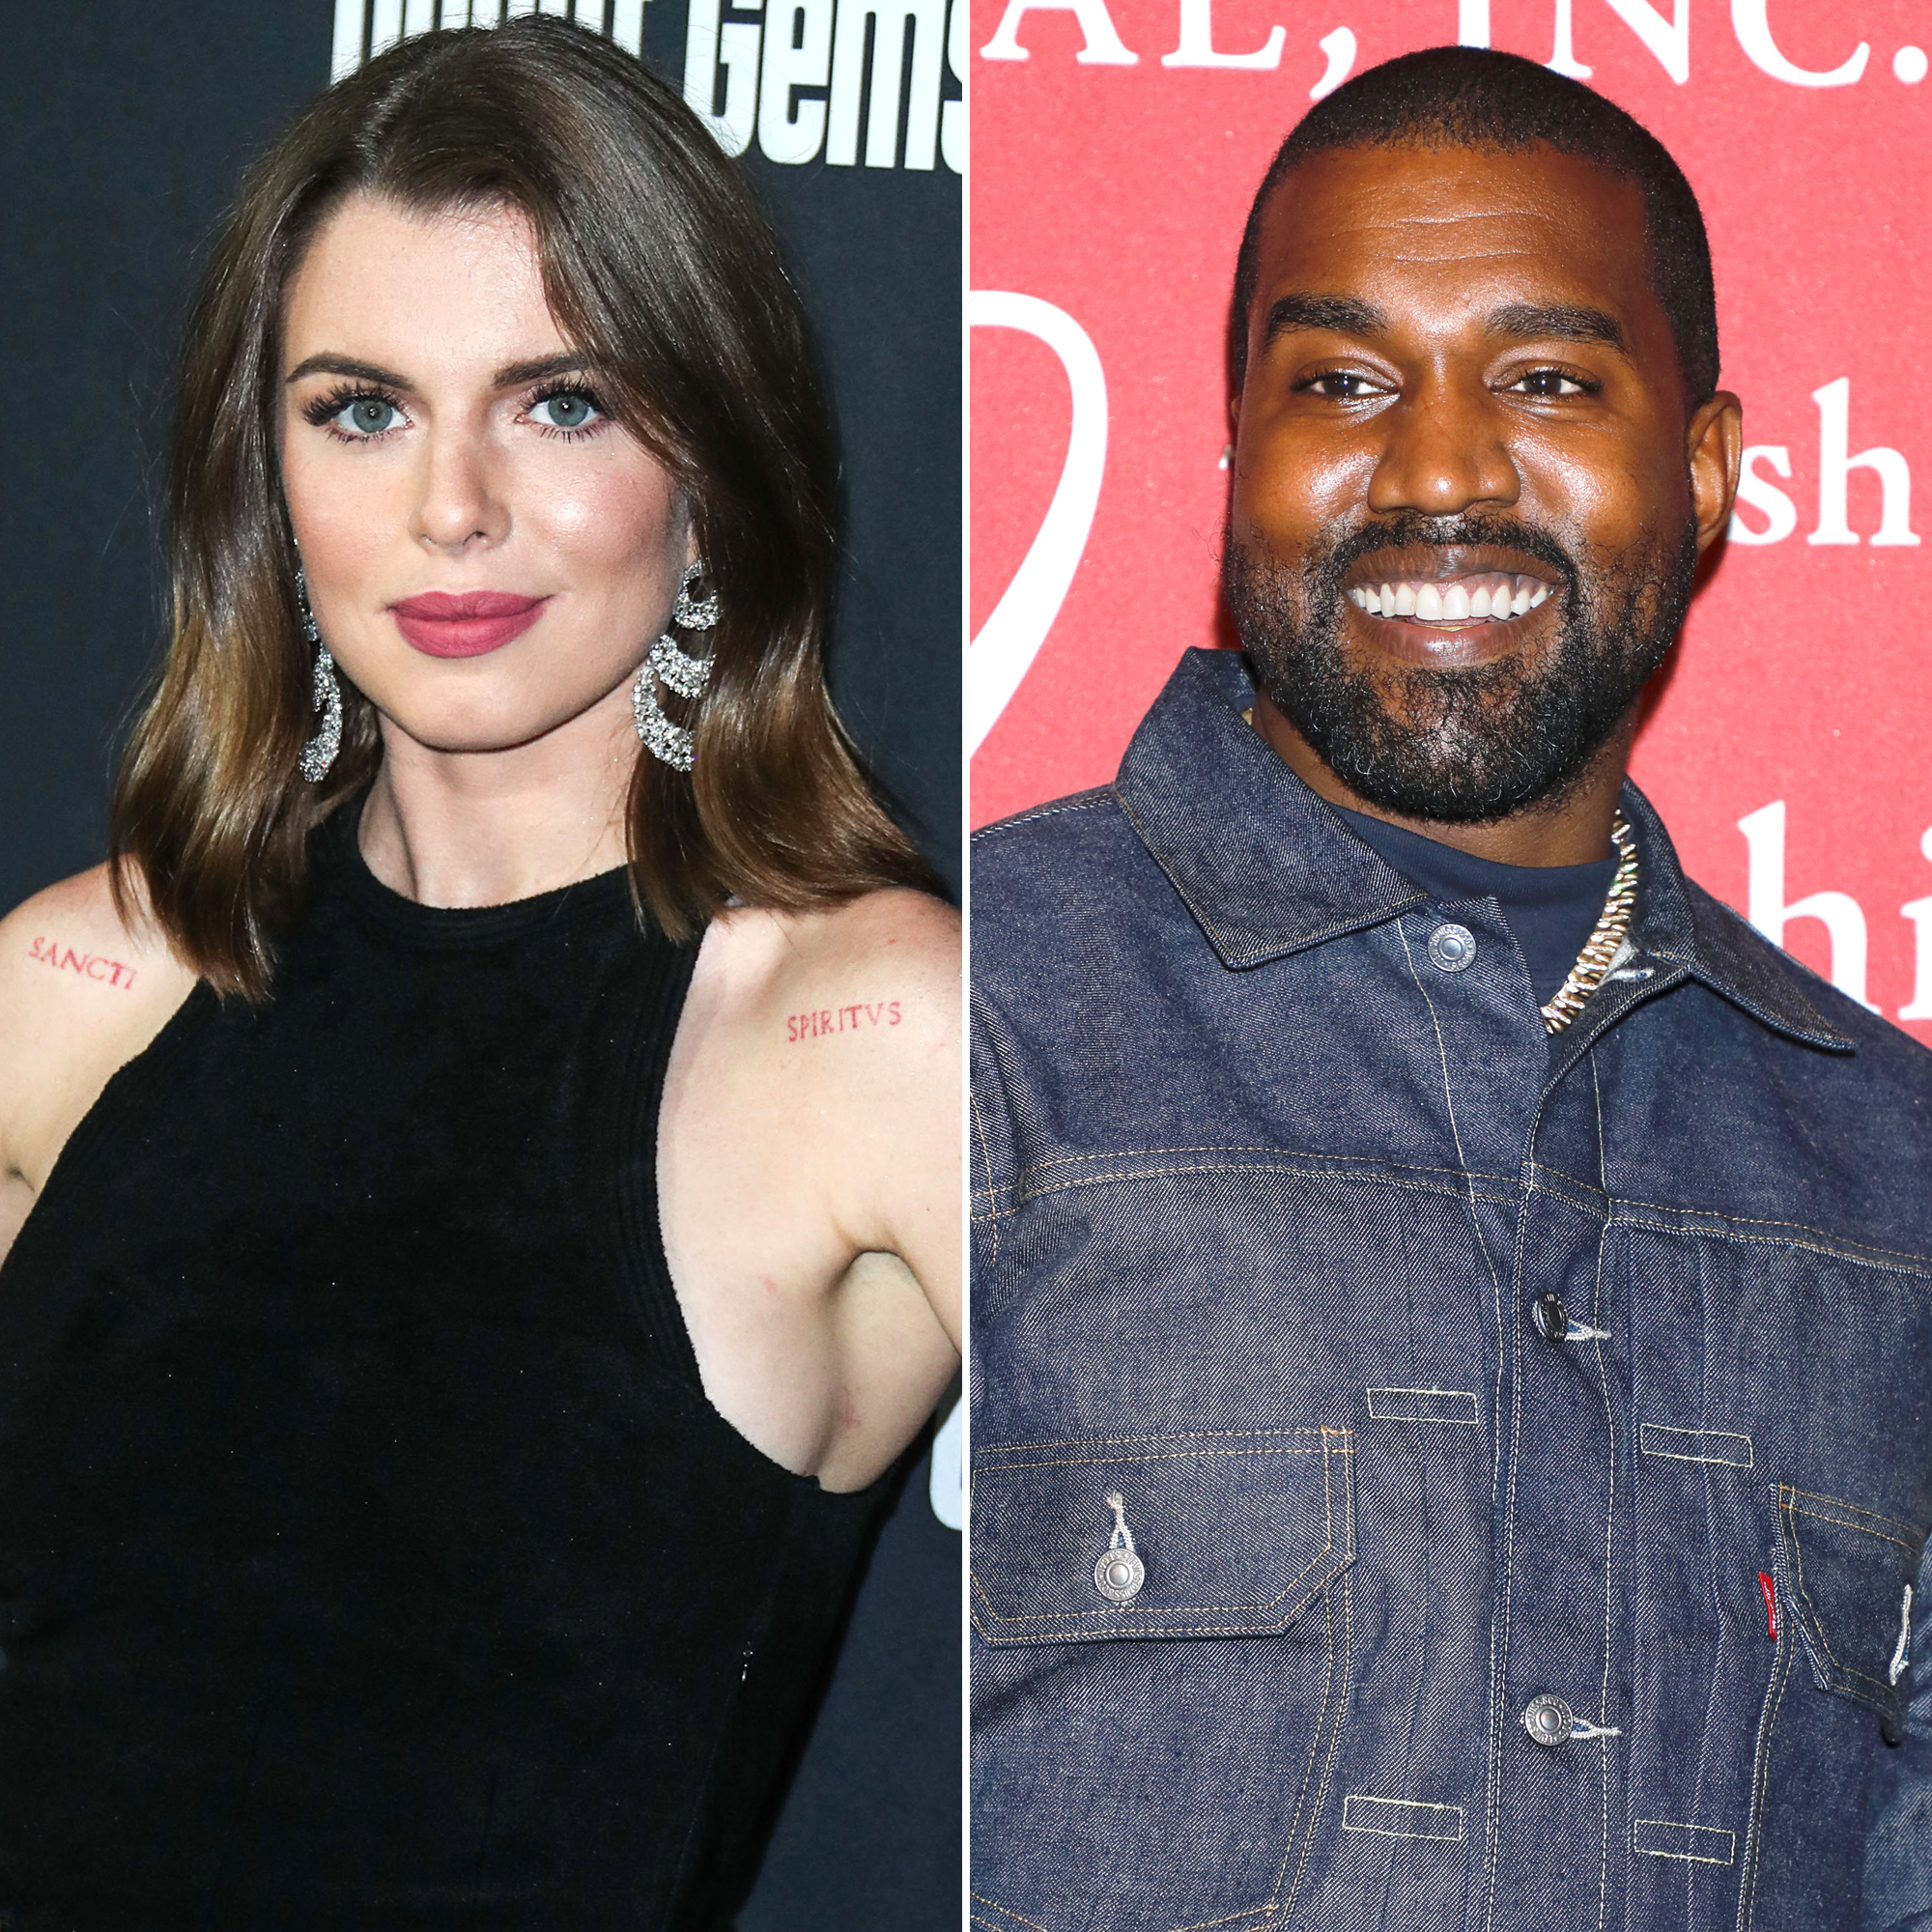 Who is Julia Fox? What You Should Know About the Woman Dating Kanye West